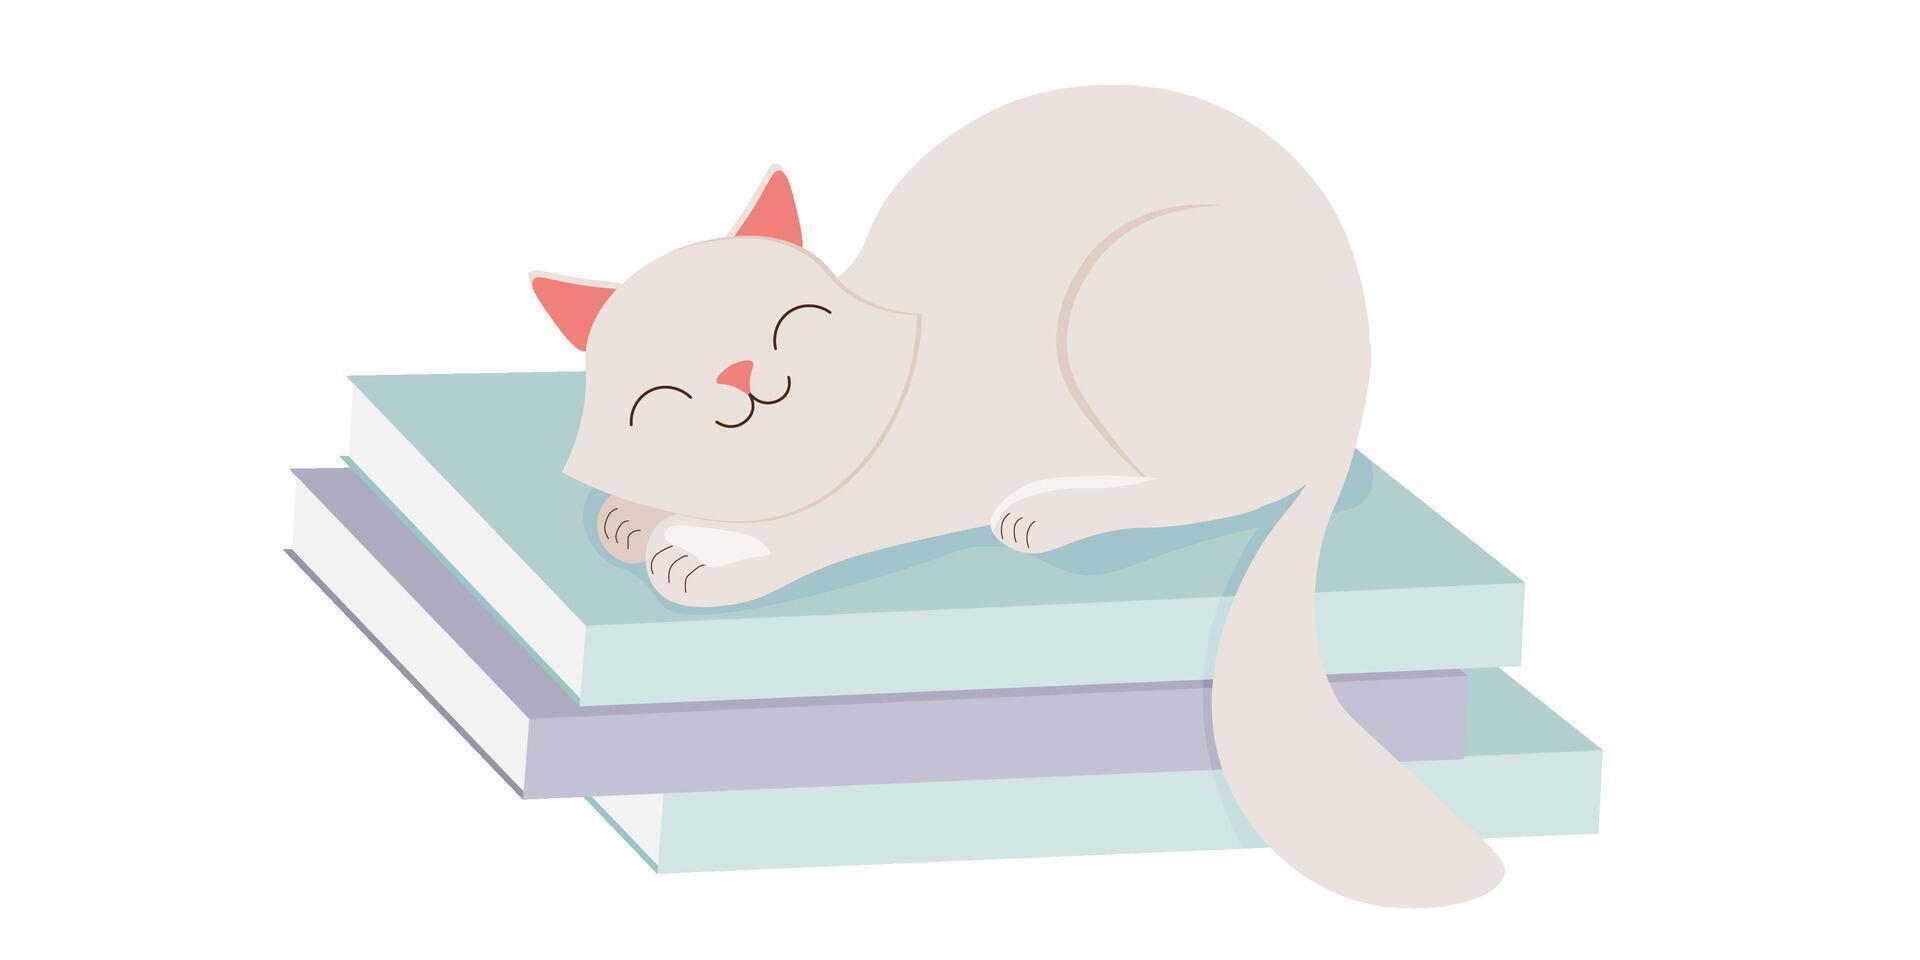 A cute cat sleeps on a stack of books. Vector illustration on a transparent background.